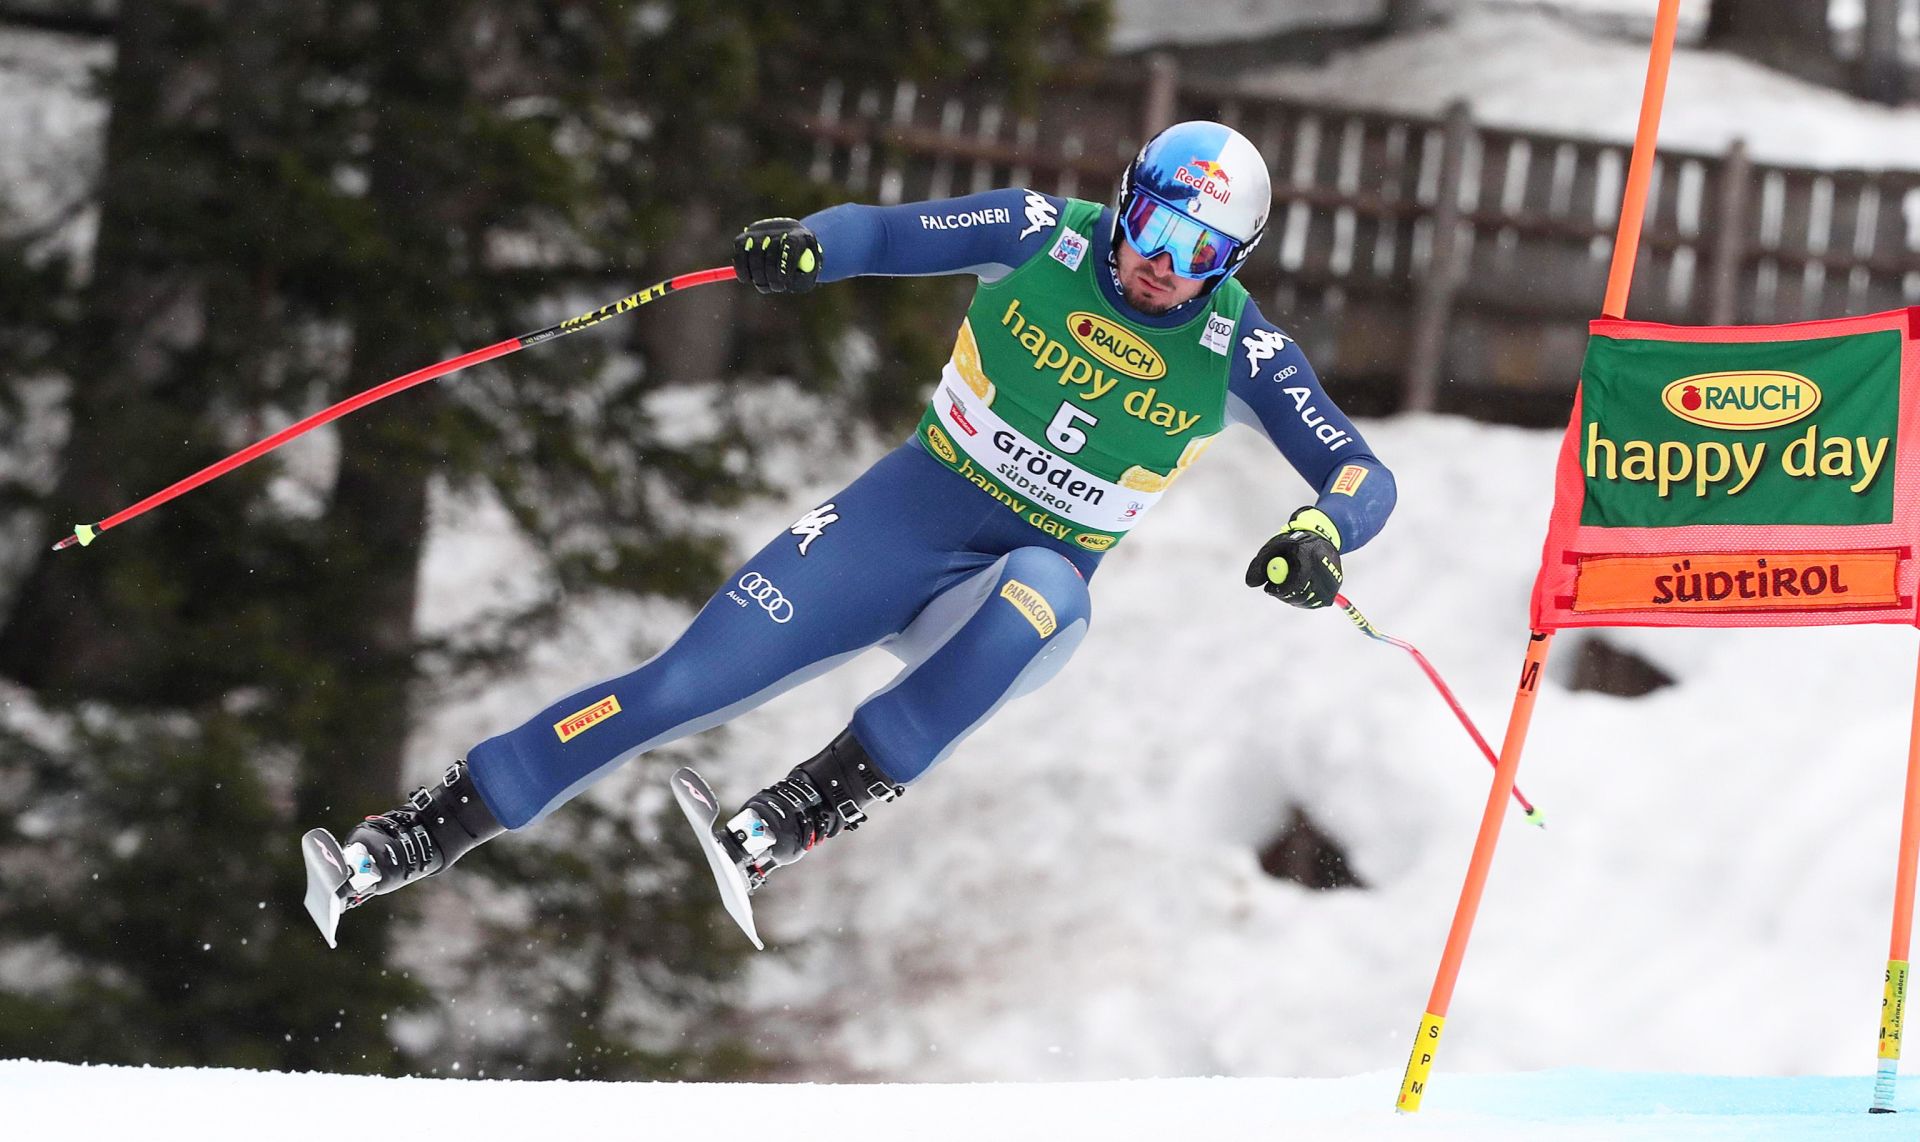 epa08083757 Dominik Paris of Italy speeds down the slope during the Men's Super-G race at the FIS Alpine Skiing World Cup event in Val Gardena, Italy, 20 December 2019.  EPA/ANDREA SOLERO